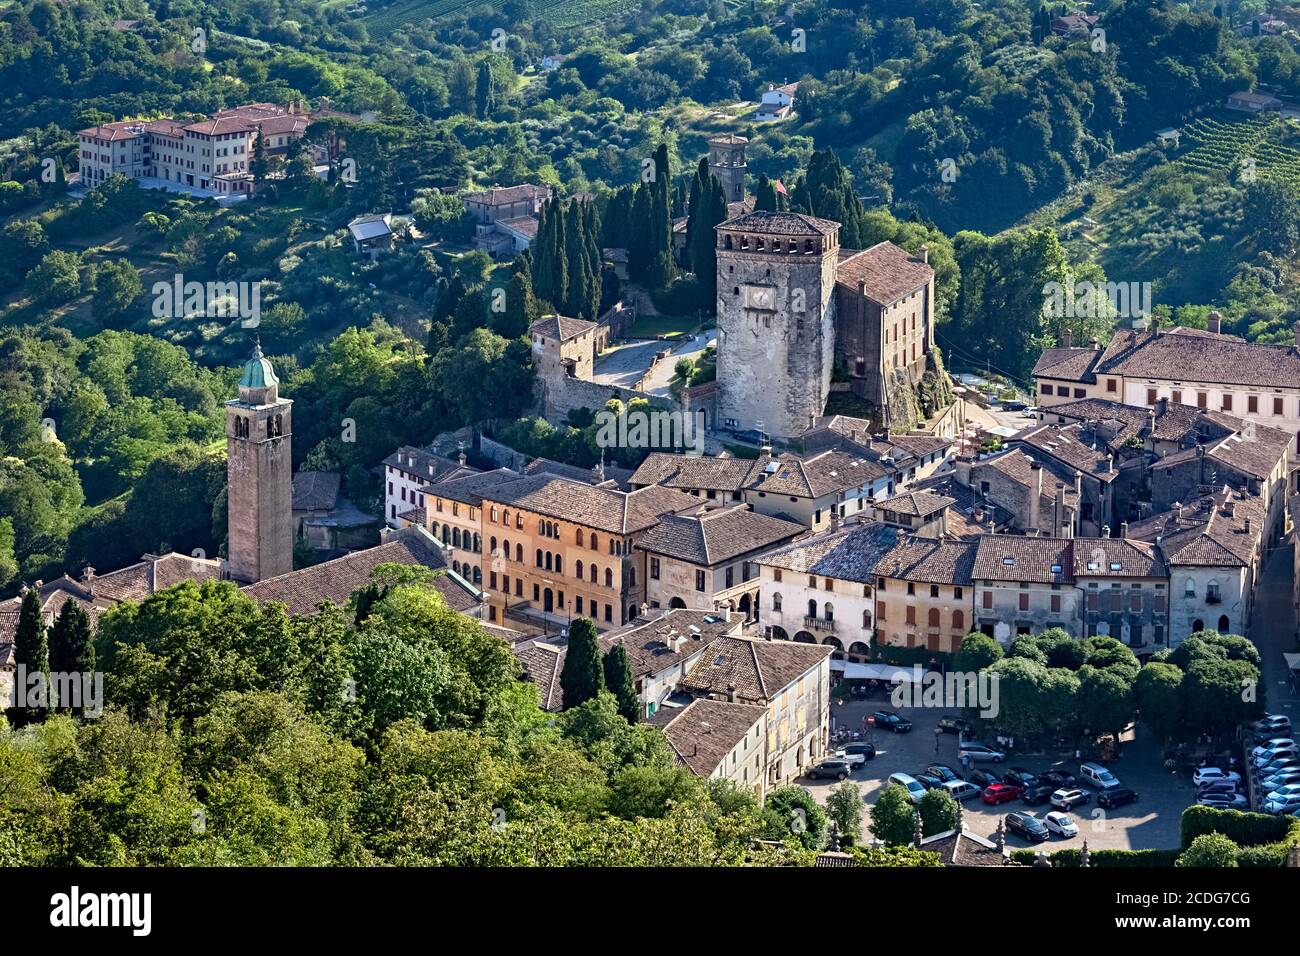 The village and the medieval castle of Asolo. Treviso province, Veneto, Italy, Europe. Stock Photo